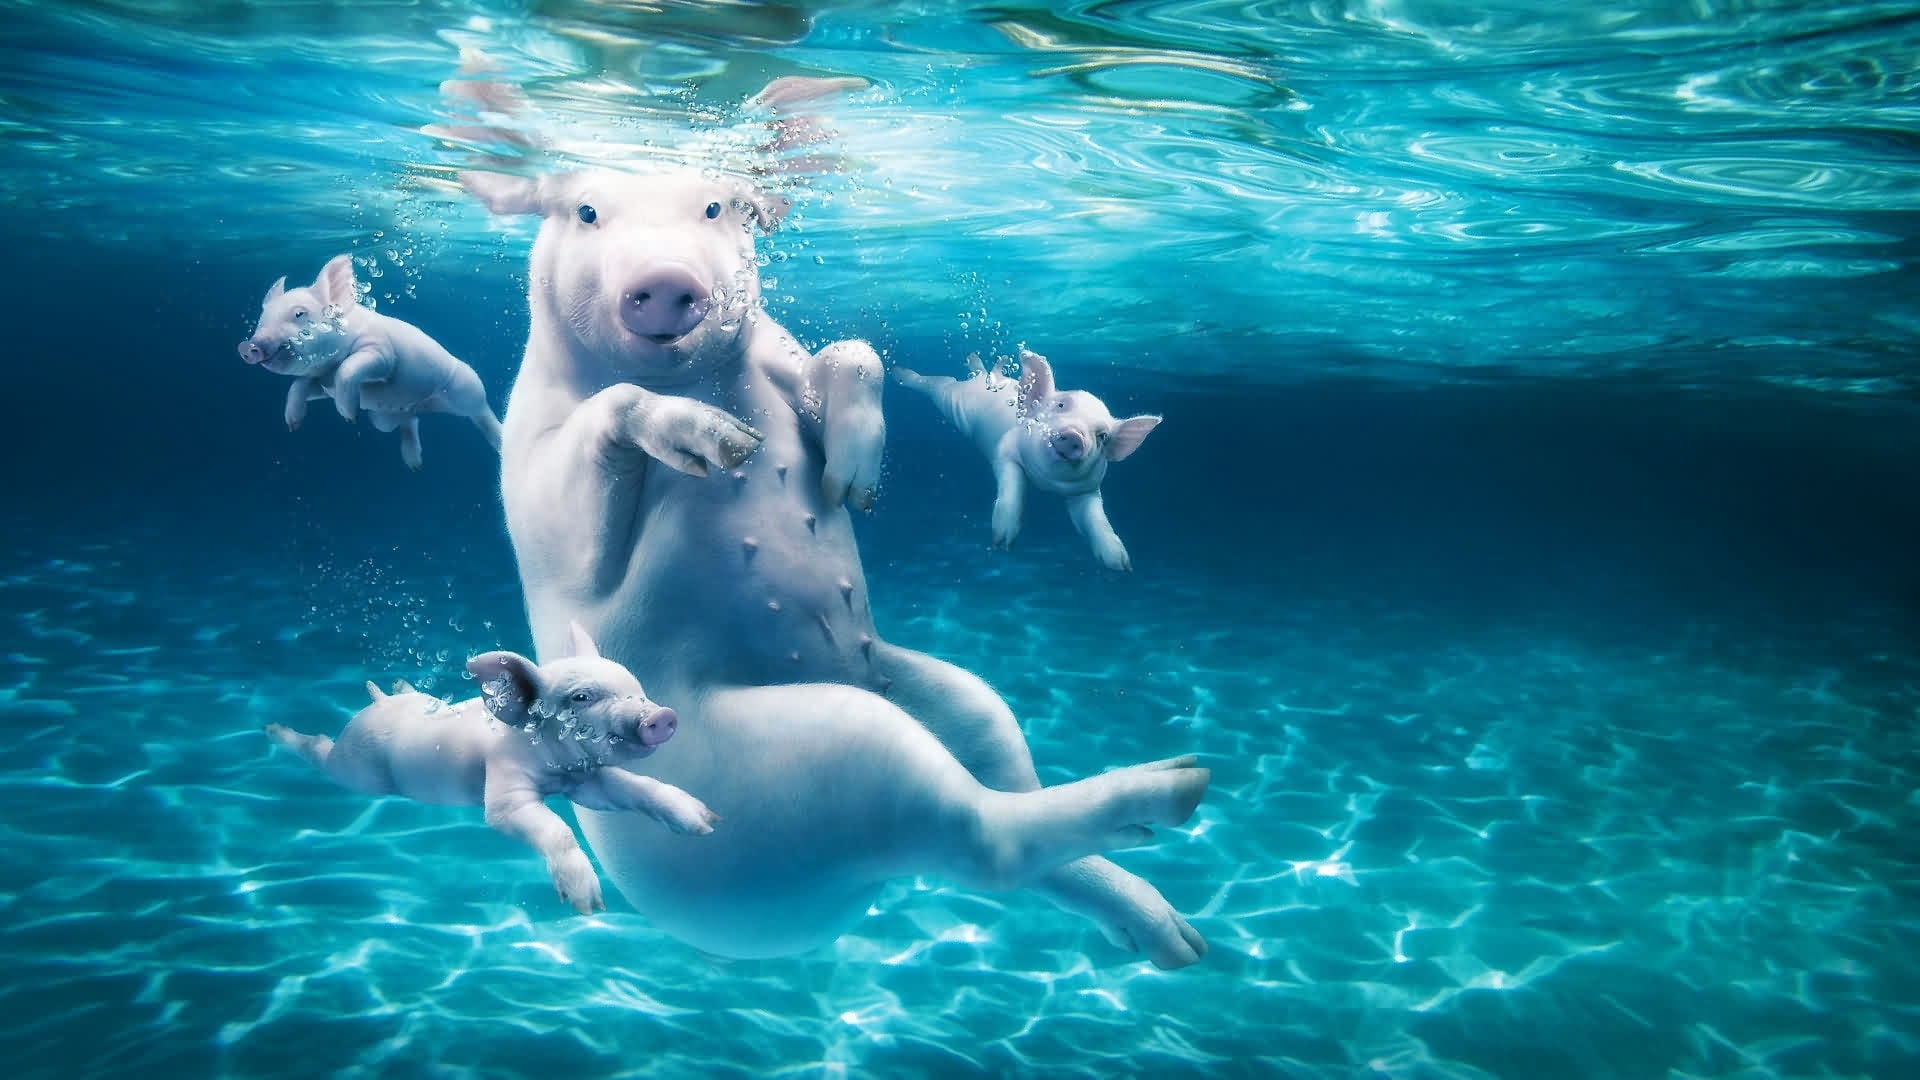 white pig and piglets, water, dive, young, swimming, underwater